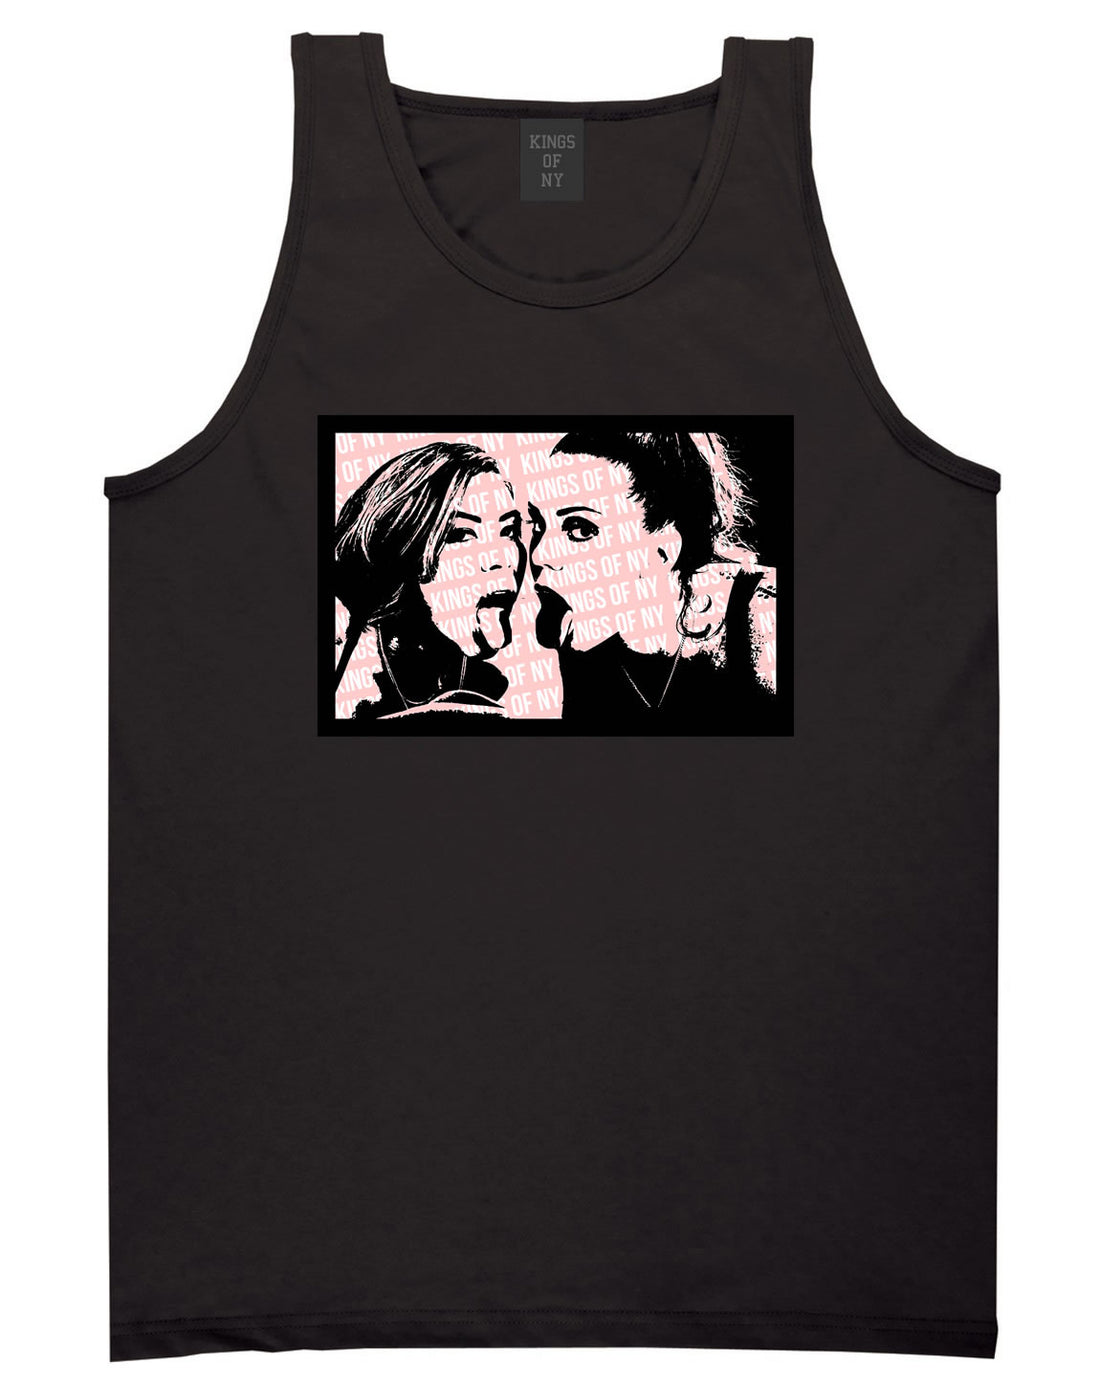 Double Up 2 Girls Tank Top